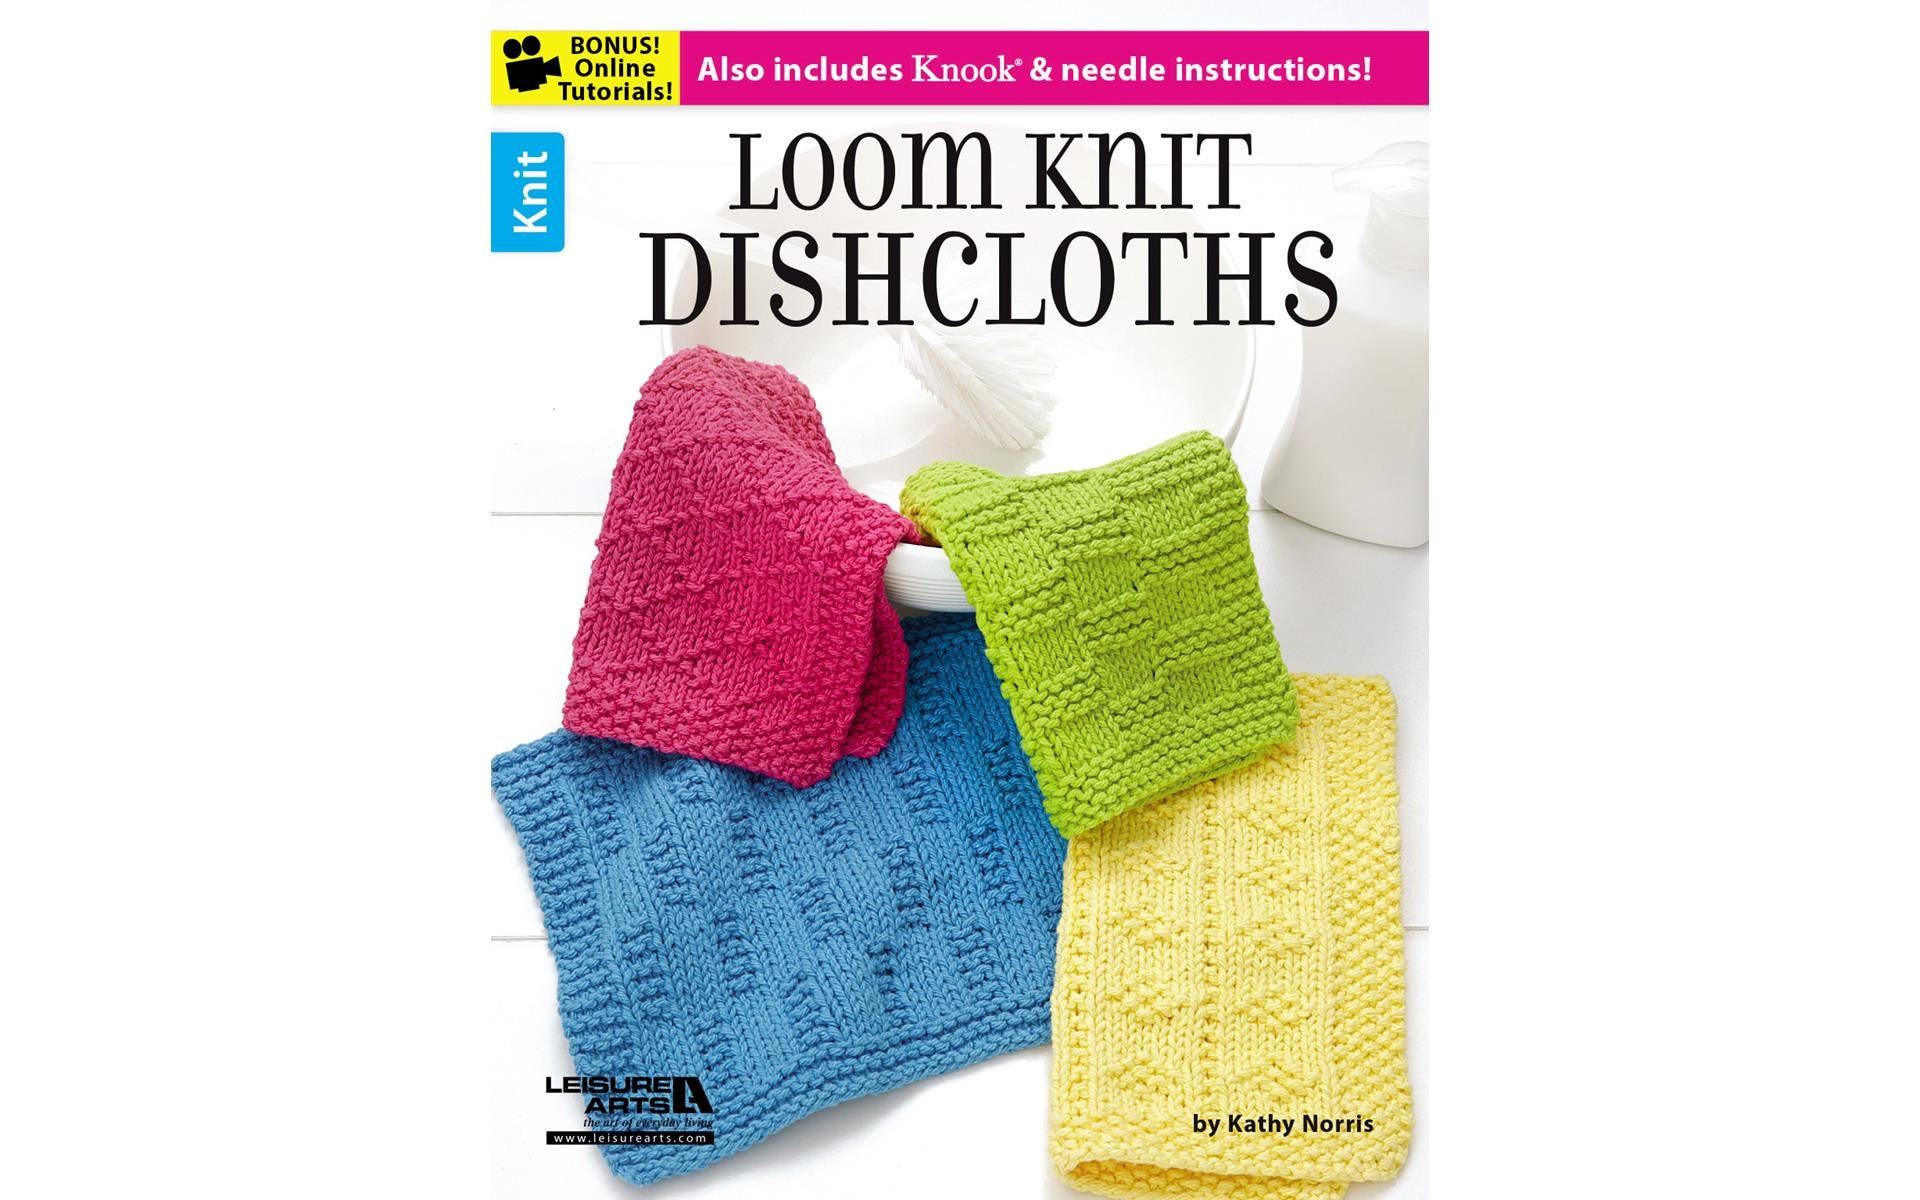 Leisure Arts Loom Knitting for Mommy & Me BK